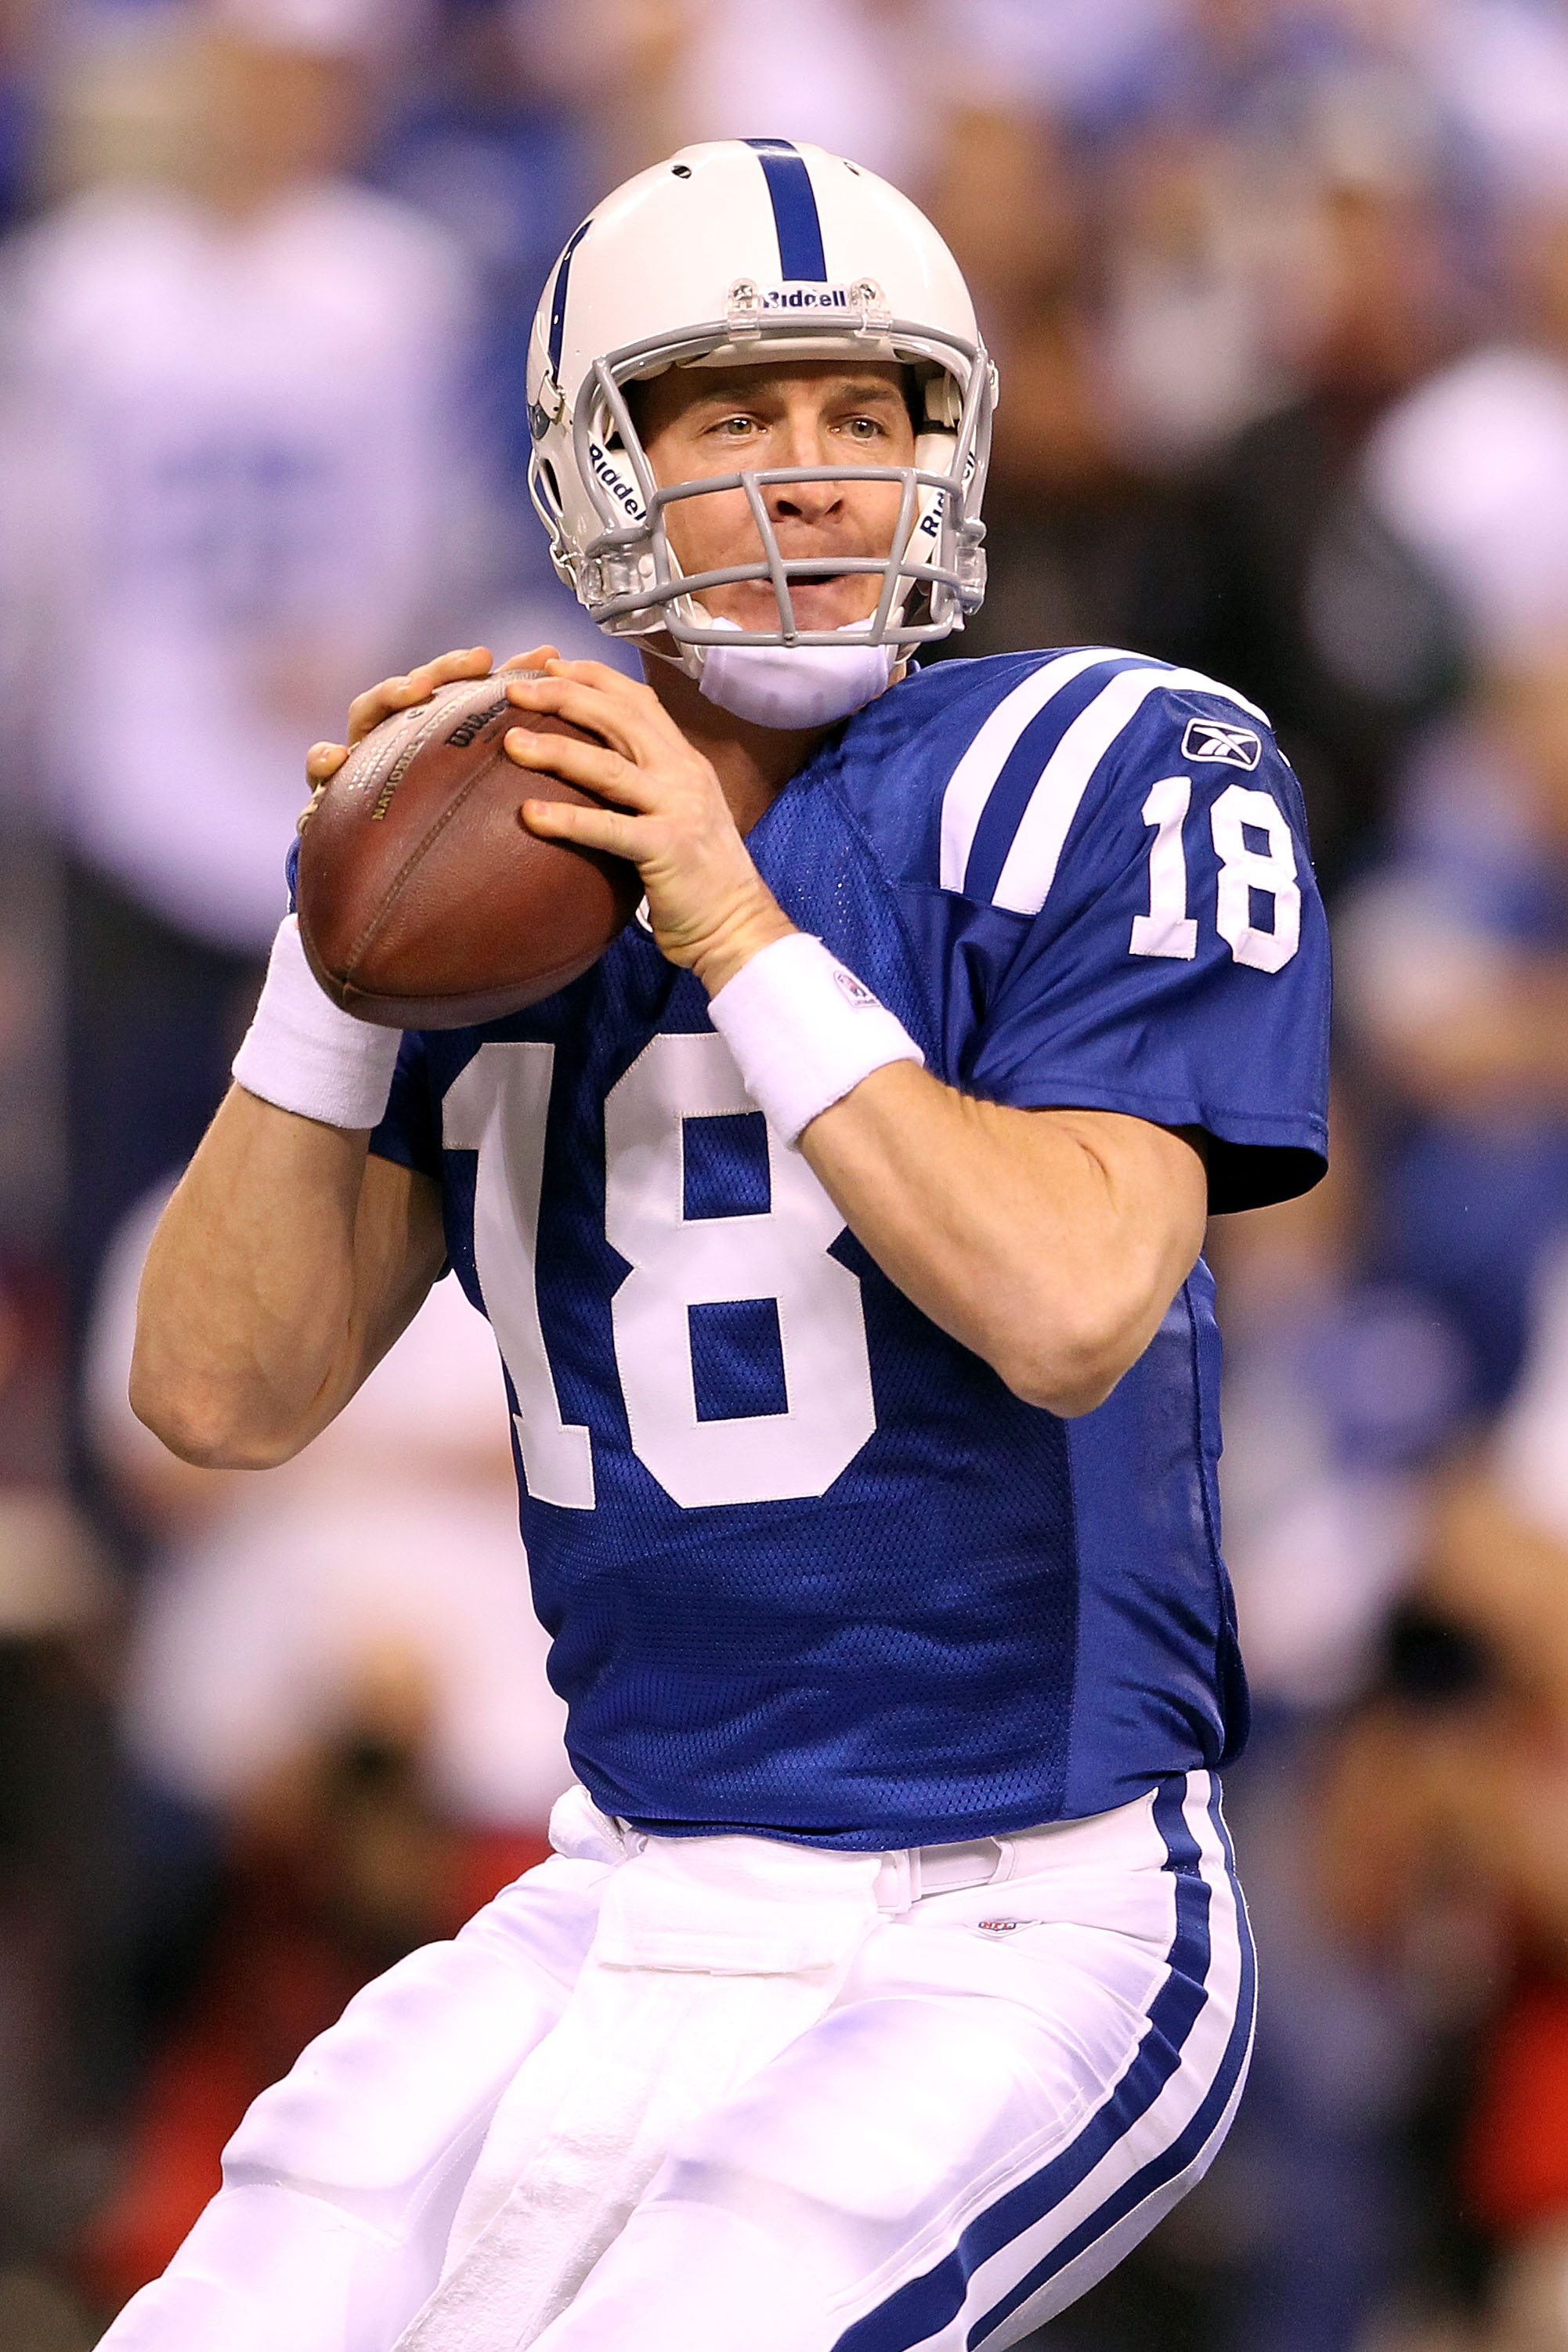 INDIANAPOLIS, IN - JANUARY 08:  Quarterback Peyton Manning #18 of the Indianapolis Colts looks to pass in the first quarter against the New York Jets during their 2011 AFC wild card playoff game at Lucas Oil Stadium on January 8, 2011 in Indianapolis, Ind